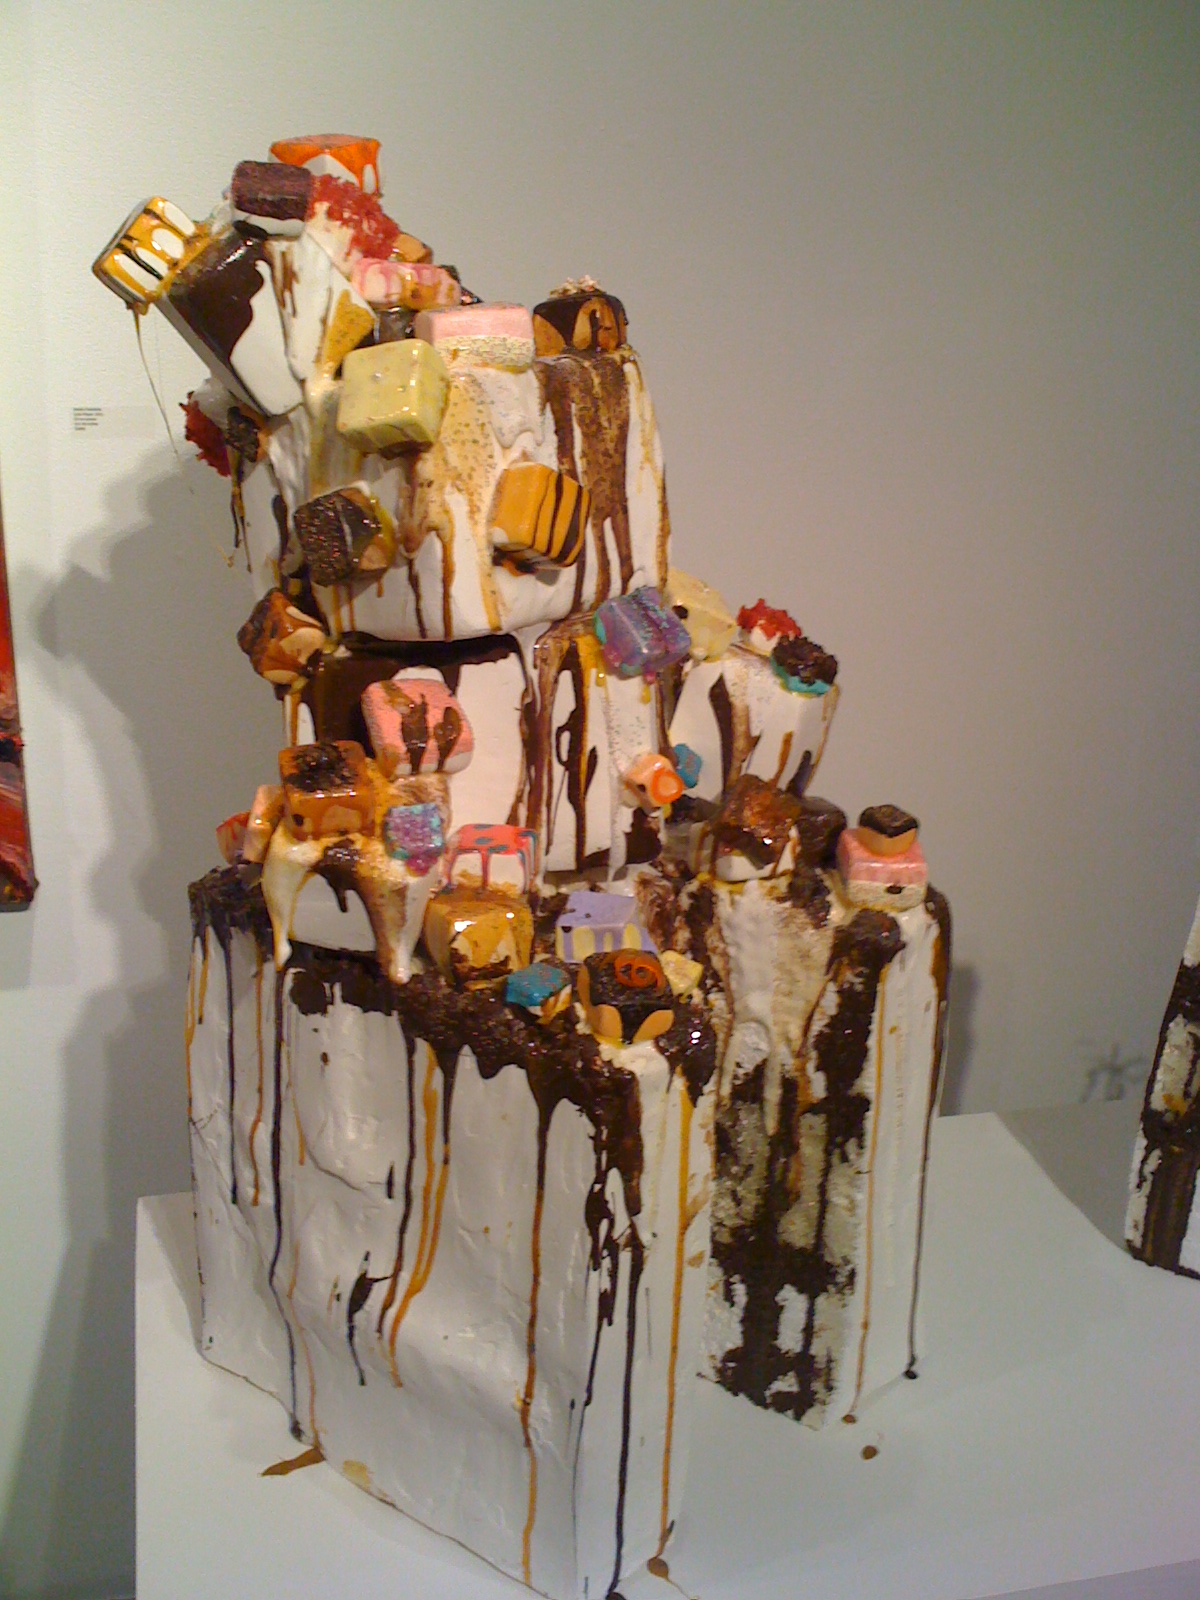   Just One S'more Piece... I'm on a Diet (Detail)   Mixed Media  2011 